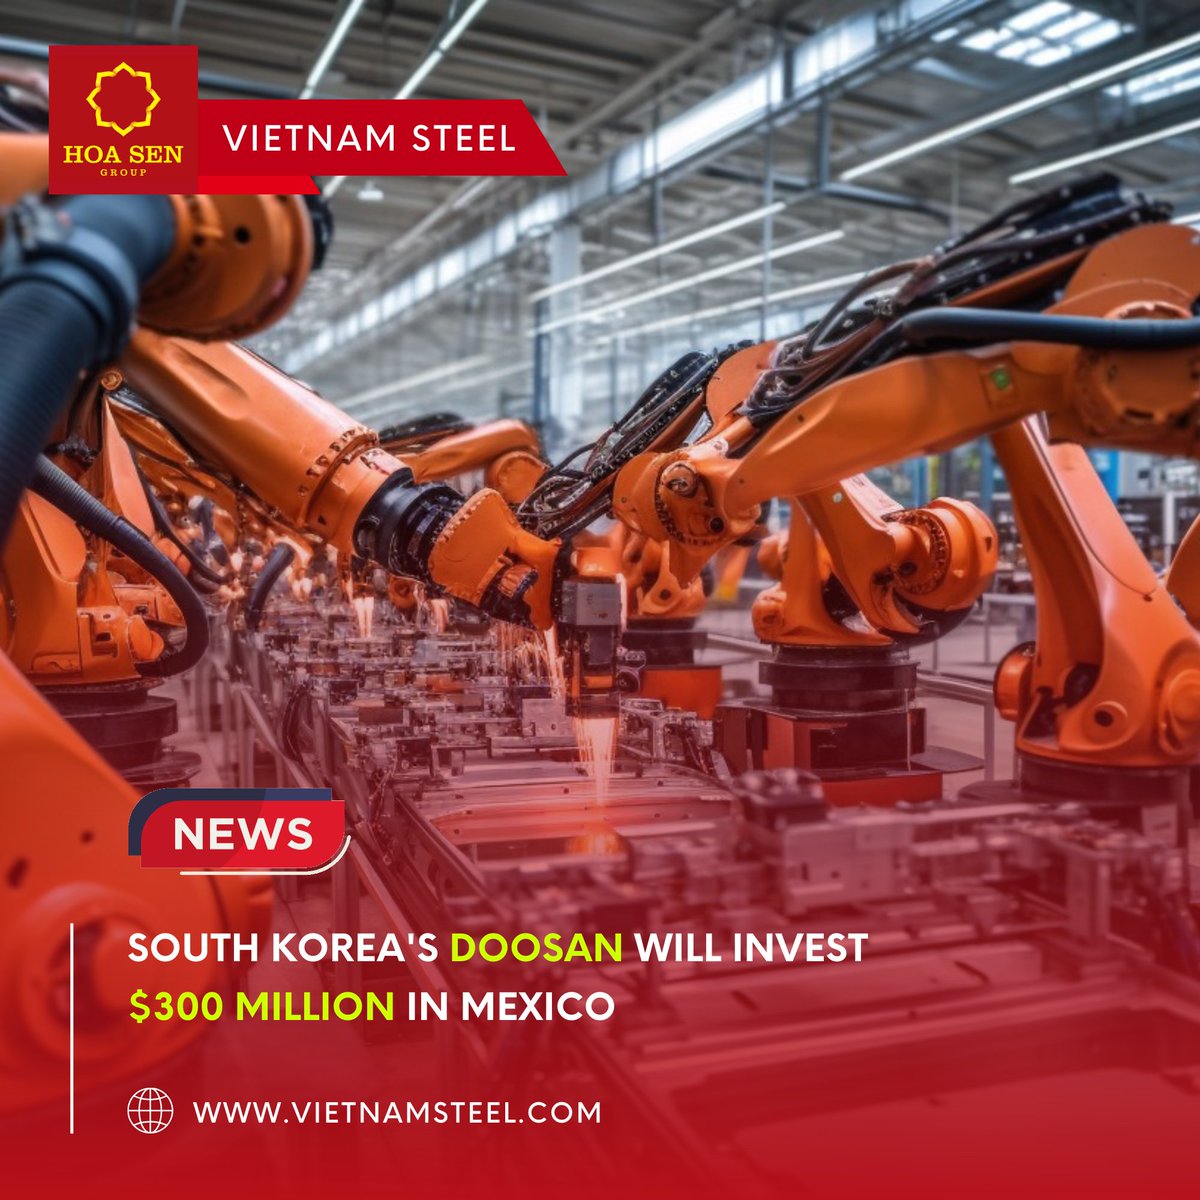 Jianlong Group's bold move: RMB 1.26 billion invested in Xining Special Steel expansion

Read More: vietnamsteel.com/blog/news-2/do…
----

Website 1: hoasengroup.vn/en/home
Website 2: vietnamsteel.com

#steelnews #steel #asiansteel #vietnamsteel